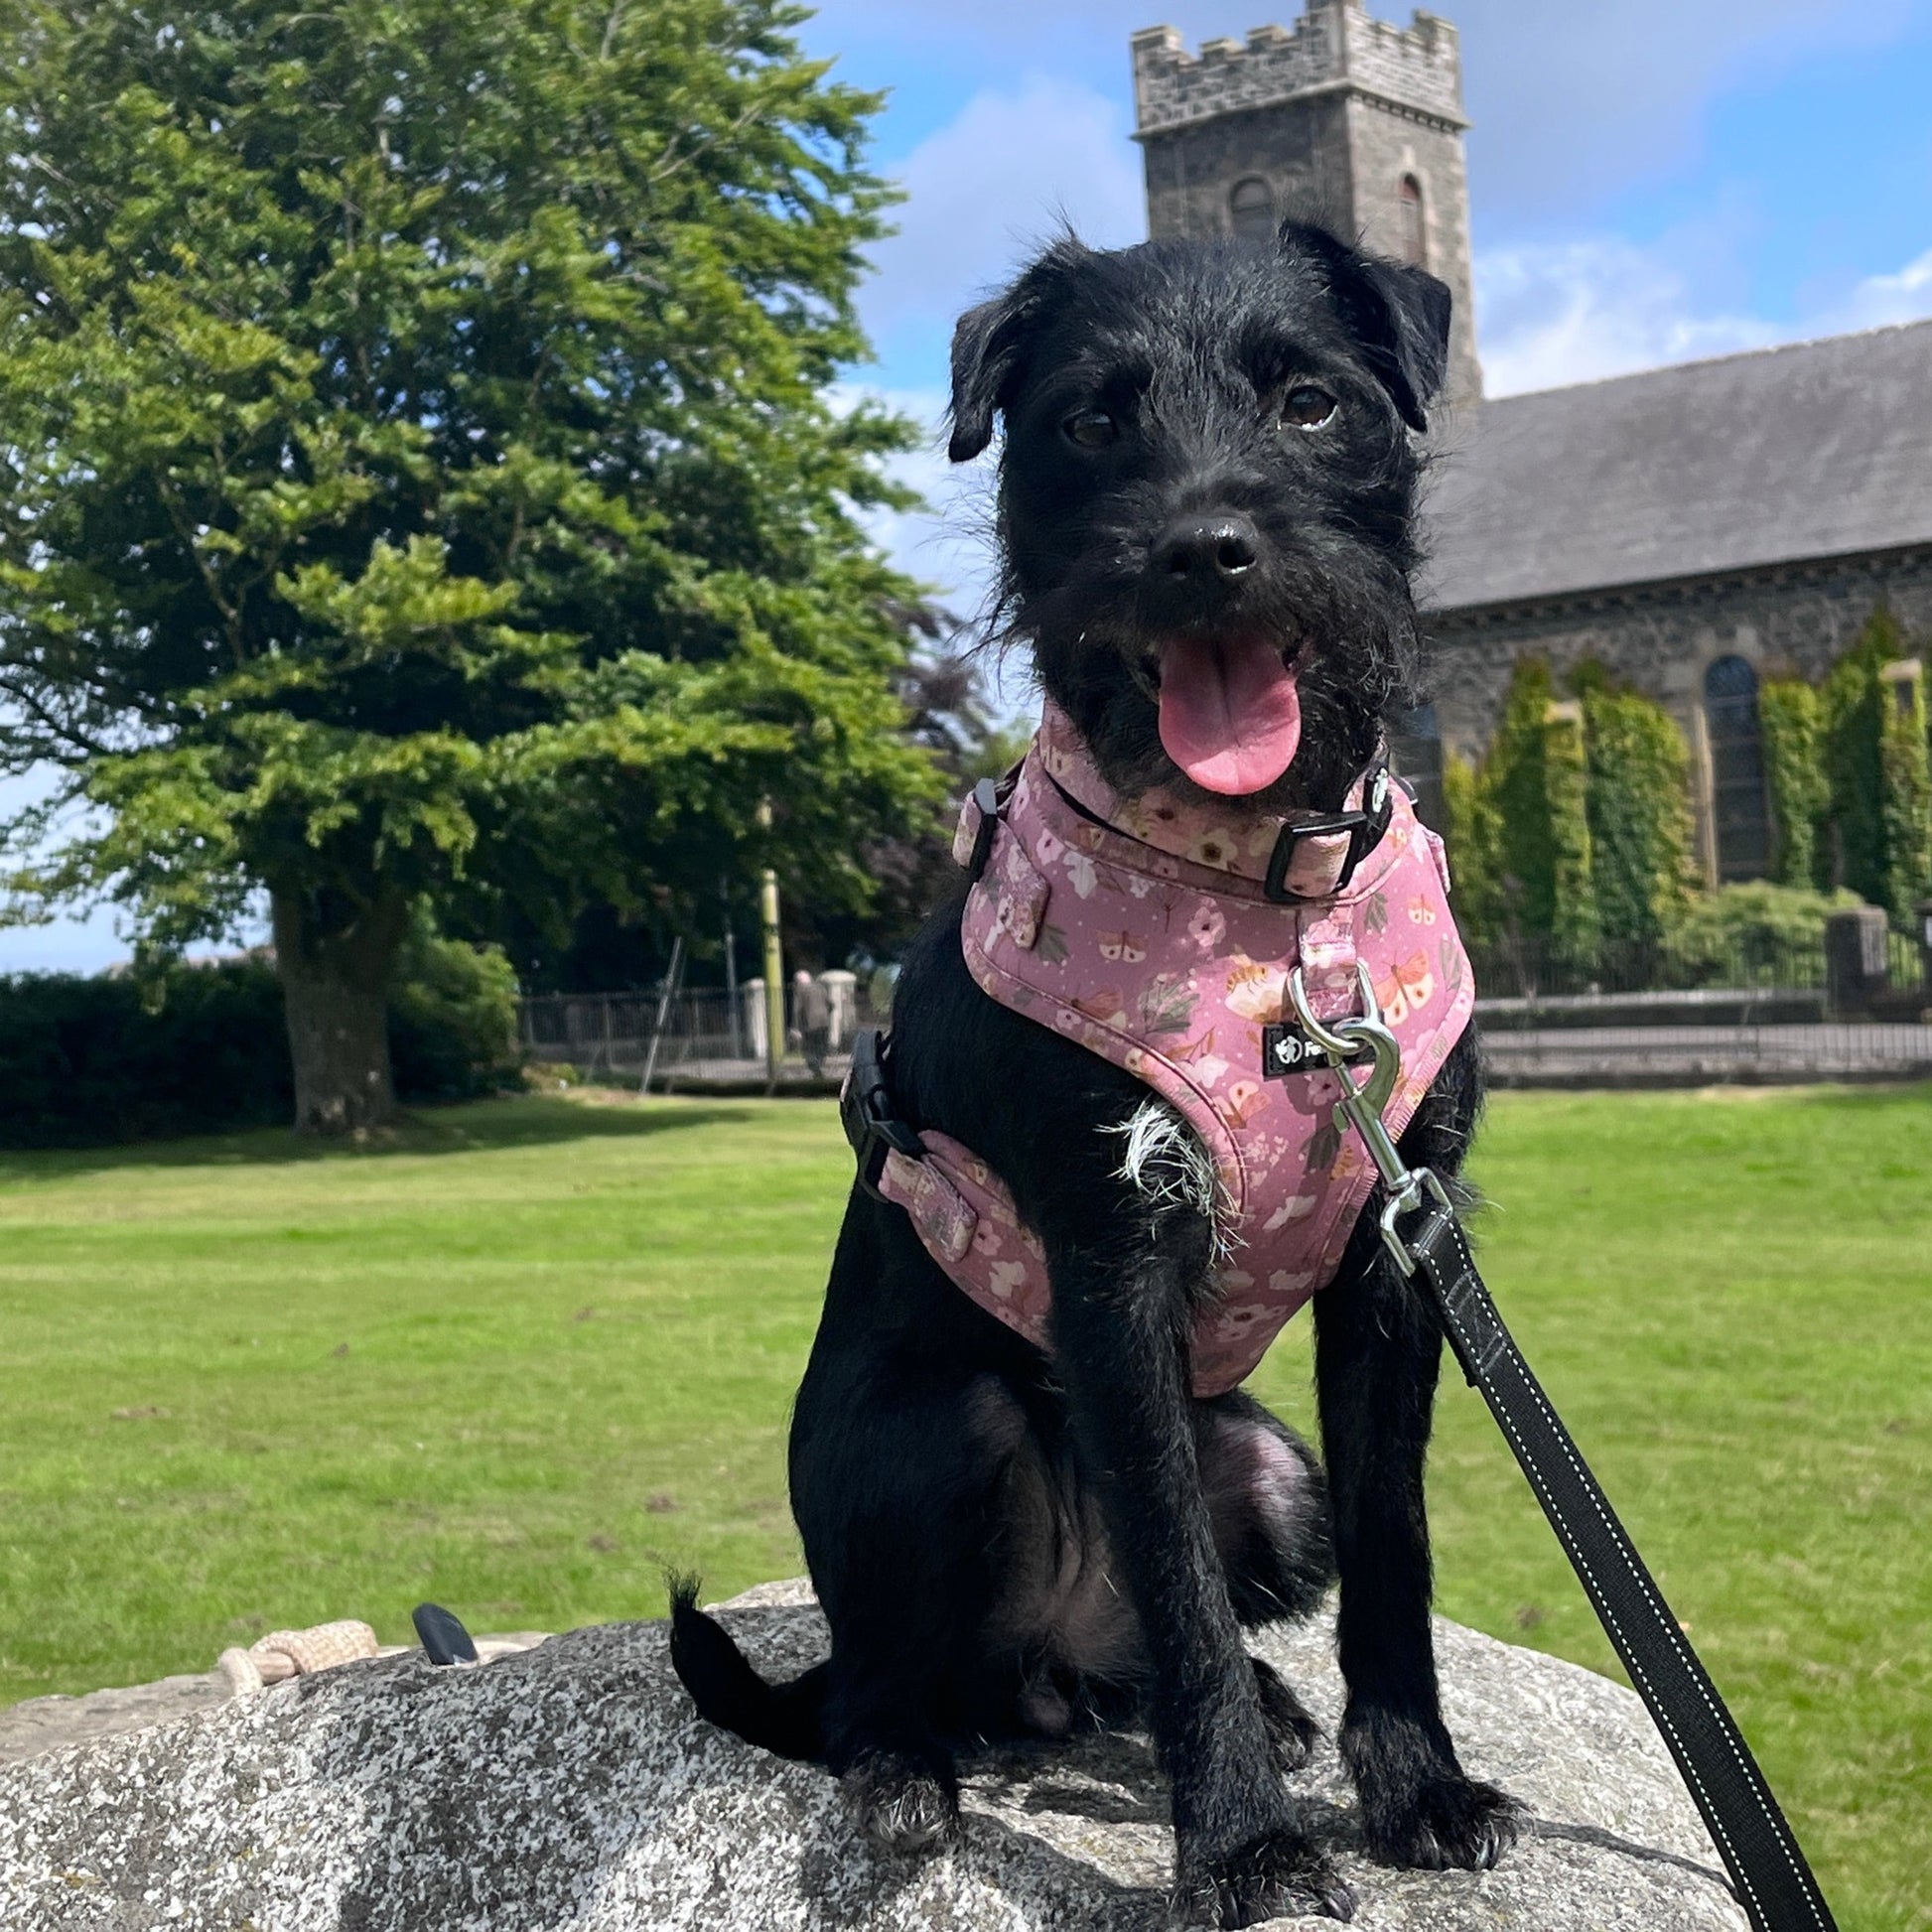 a photo of a black dog wearing a pink harness and matching collar  sitting on a rock with a castle and green grass in the background